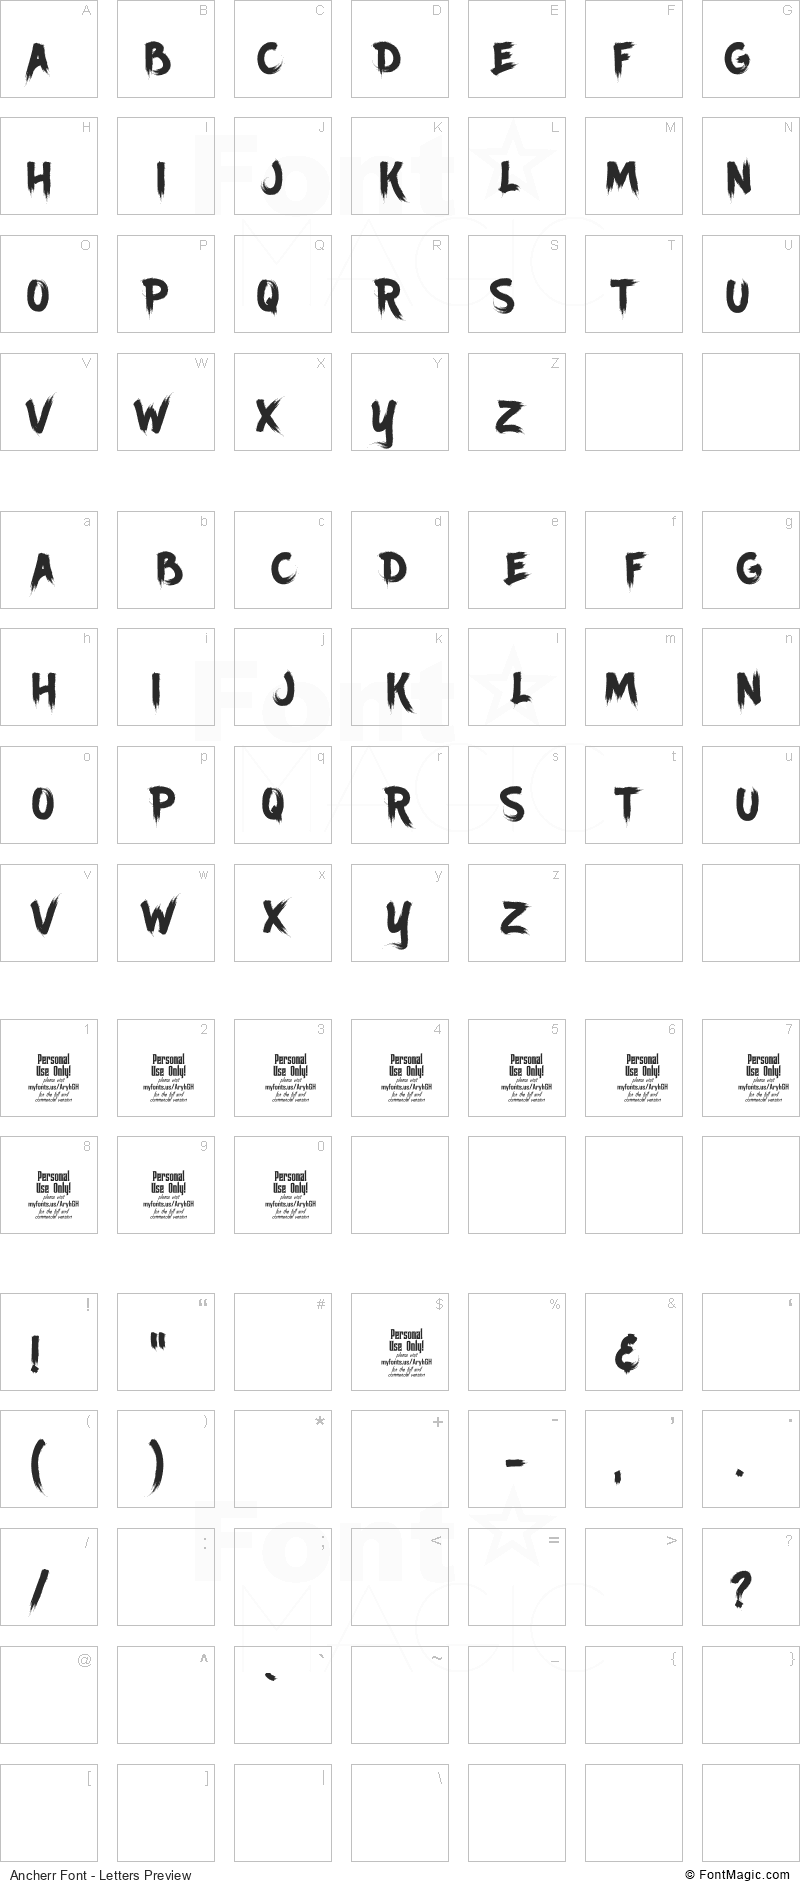 Ancherr Font - All Latters Preview Chart